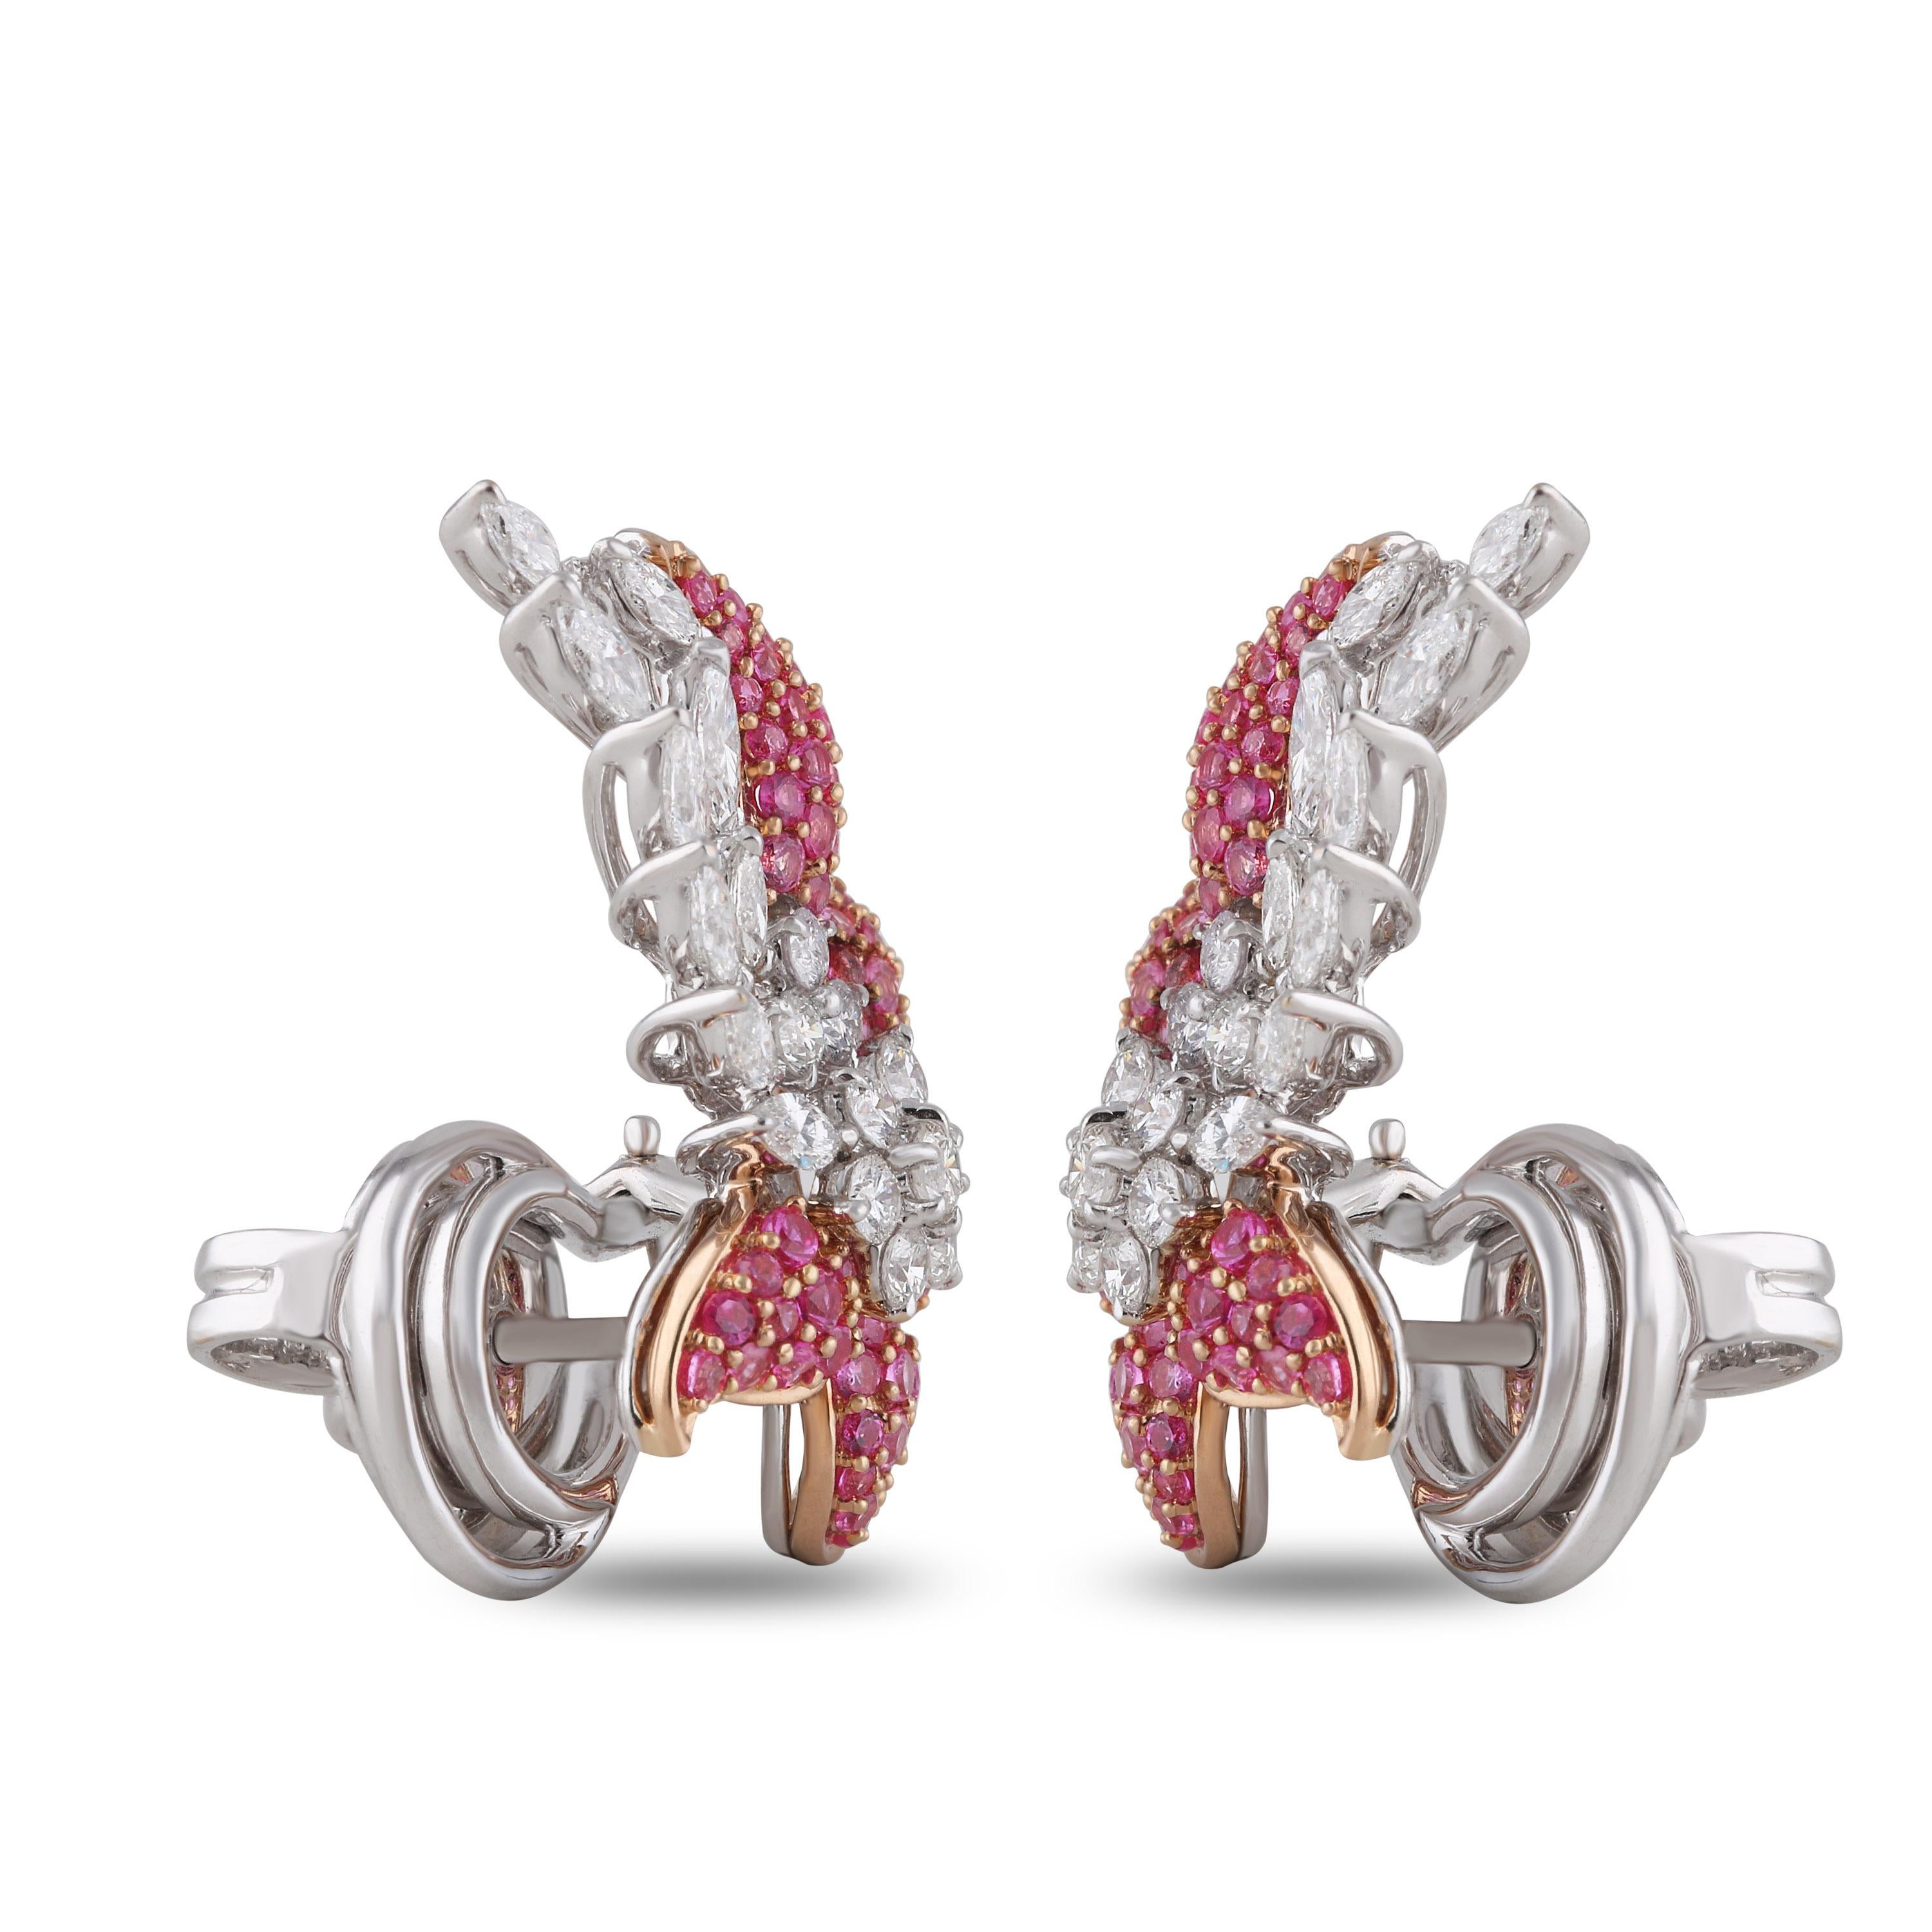 Studio Rêves Diamonds and Pink Sapphire Clip-On Earrings in 18 Karat Gold In New Condition For Sale In Mumbai, Maharashtra